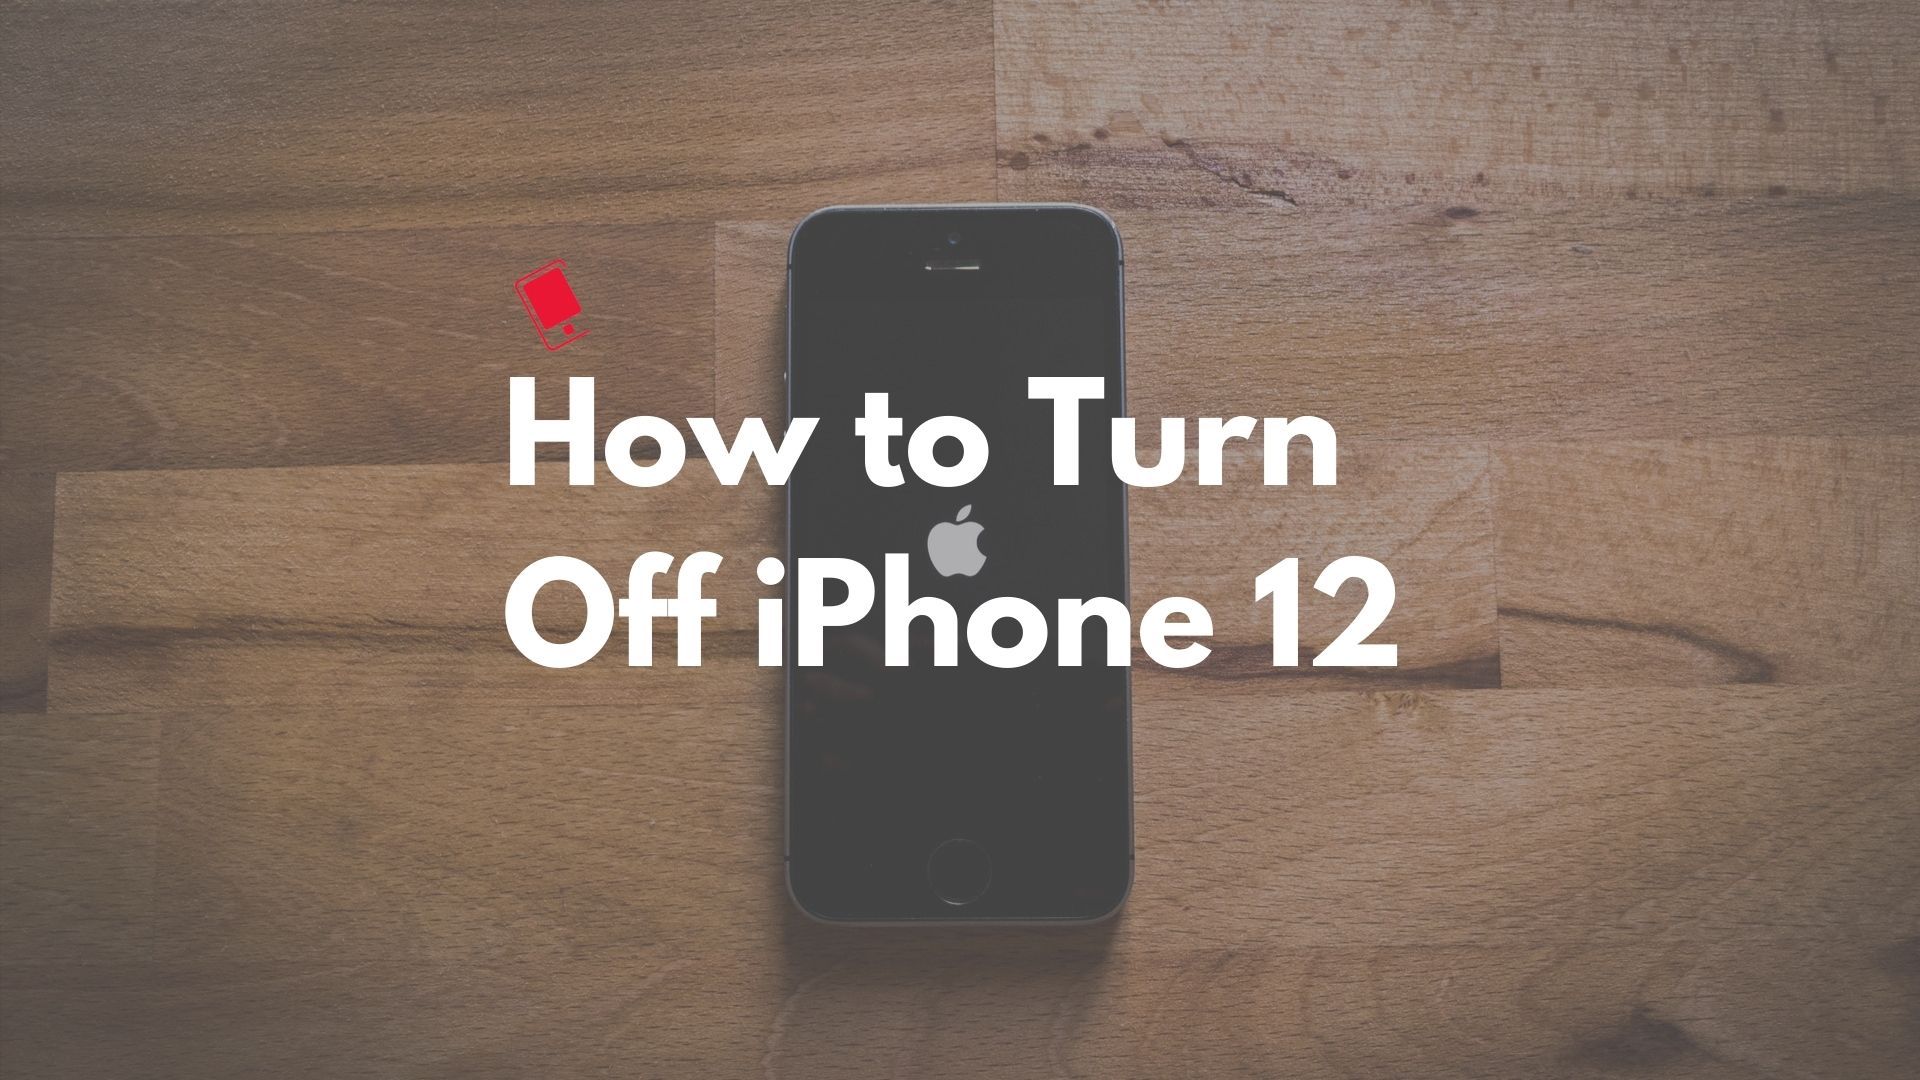 How to Turn Off iPhone 12 or iPhone 12 Pro